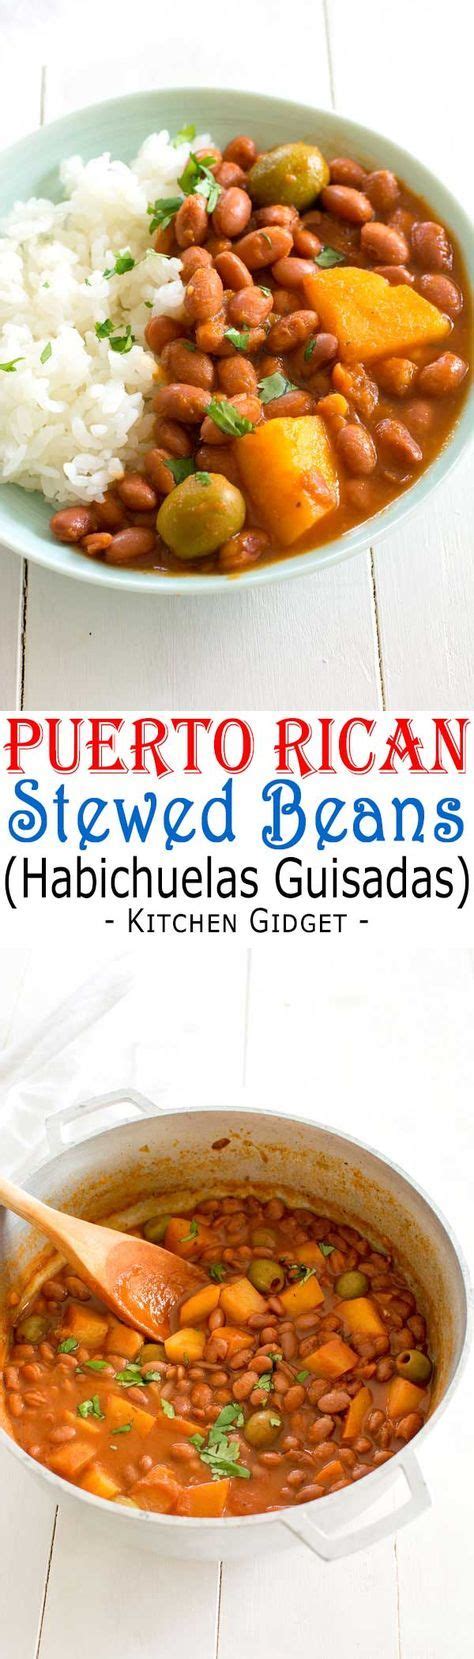 Puerto rican rice, pigeon beans, and pork chops recipe. Puerto Rican Rice and Beans (Habichuelas Guisadas) | Easy ...